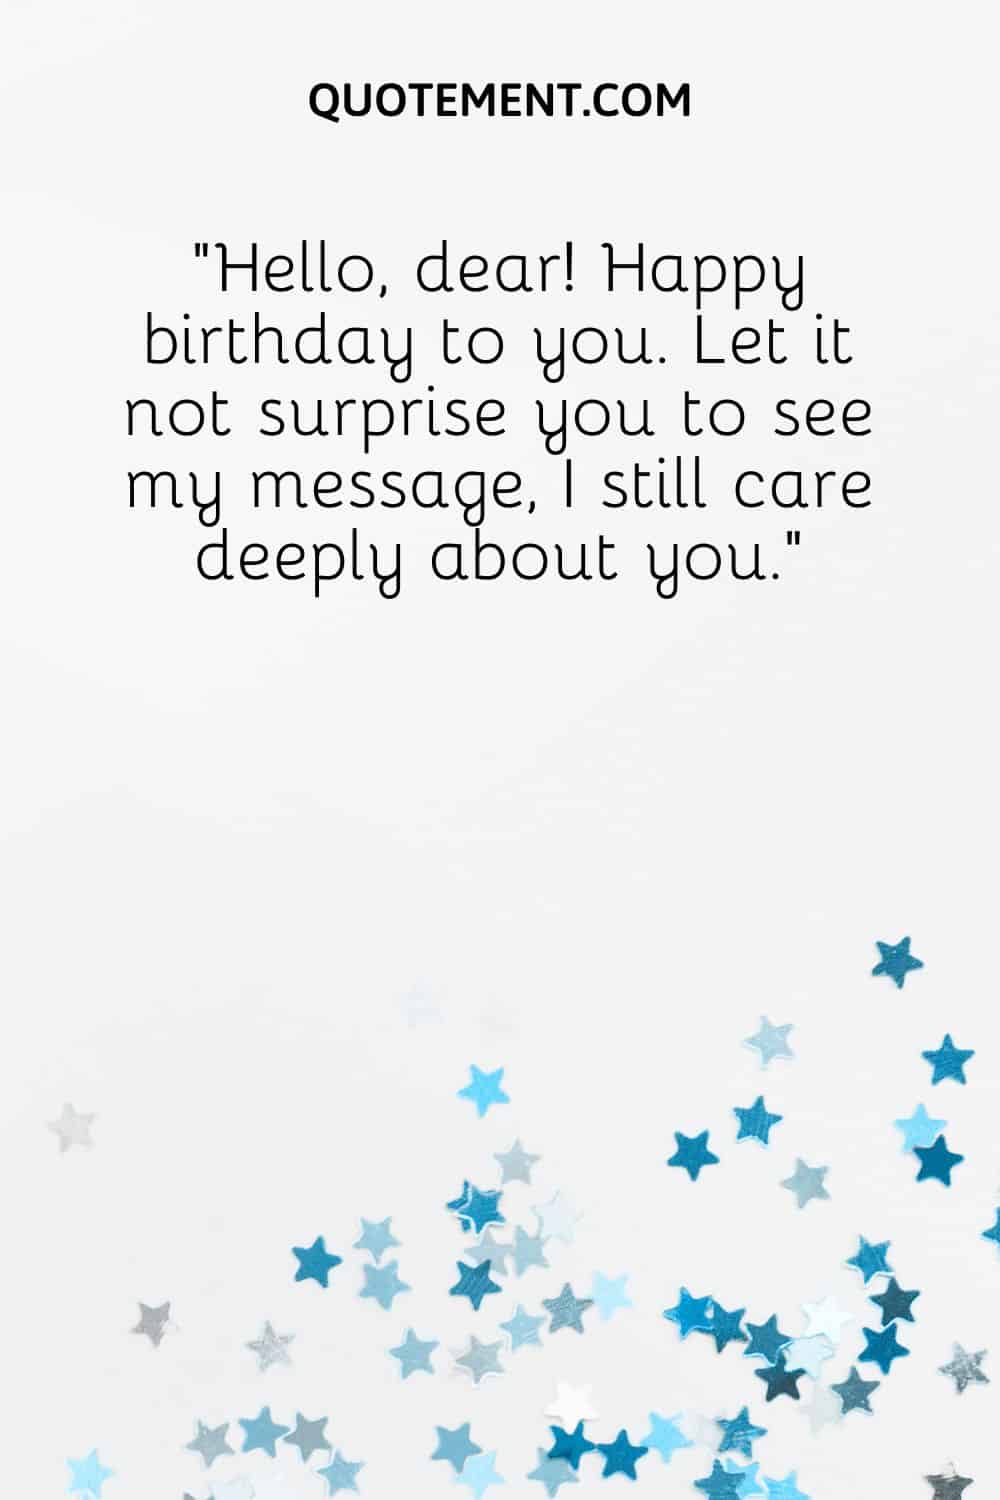 Let it not surprise you to see my message, I still care deeply about you